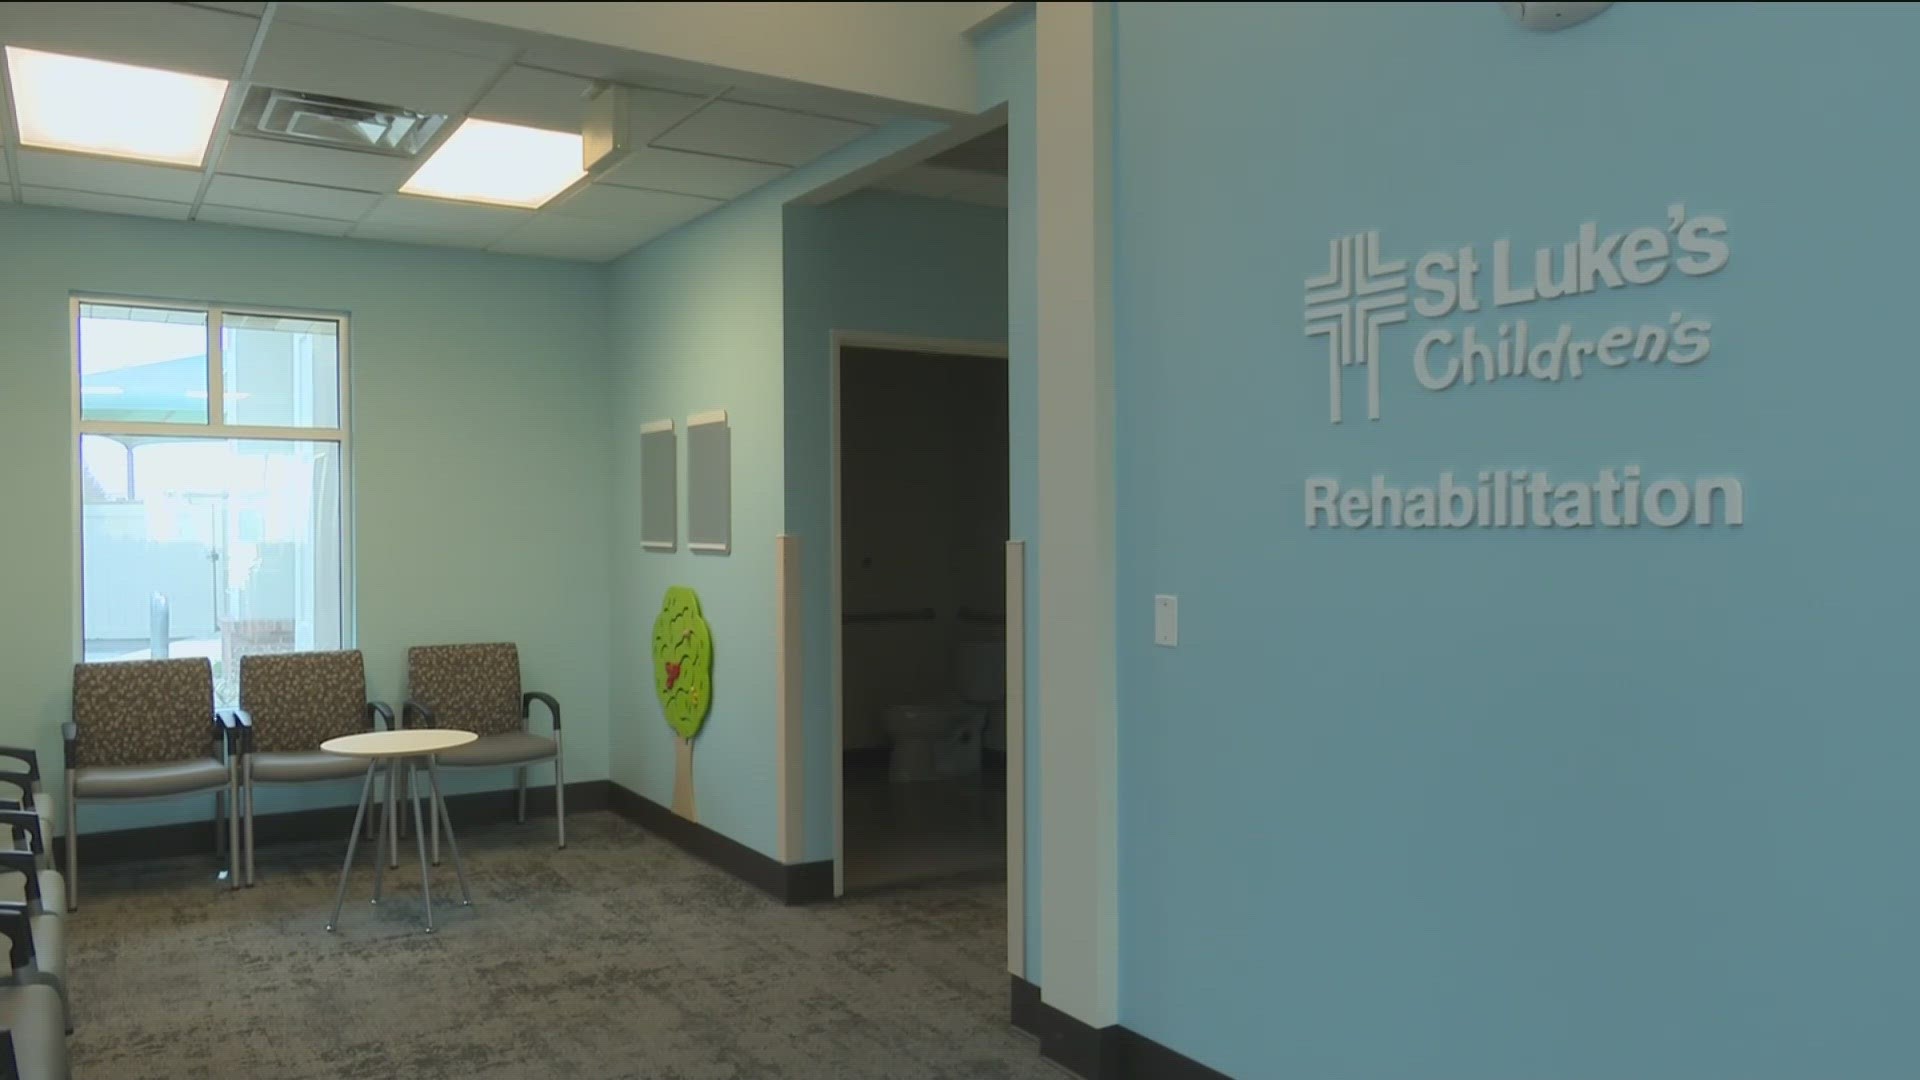 The new St. Luke's clinic in Meridian provides alternative communication therapy and specialized pediatric rehabilitation therapies.